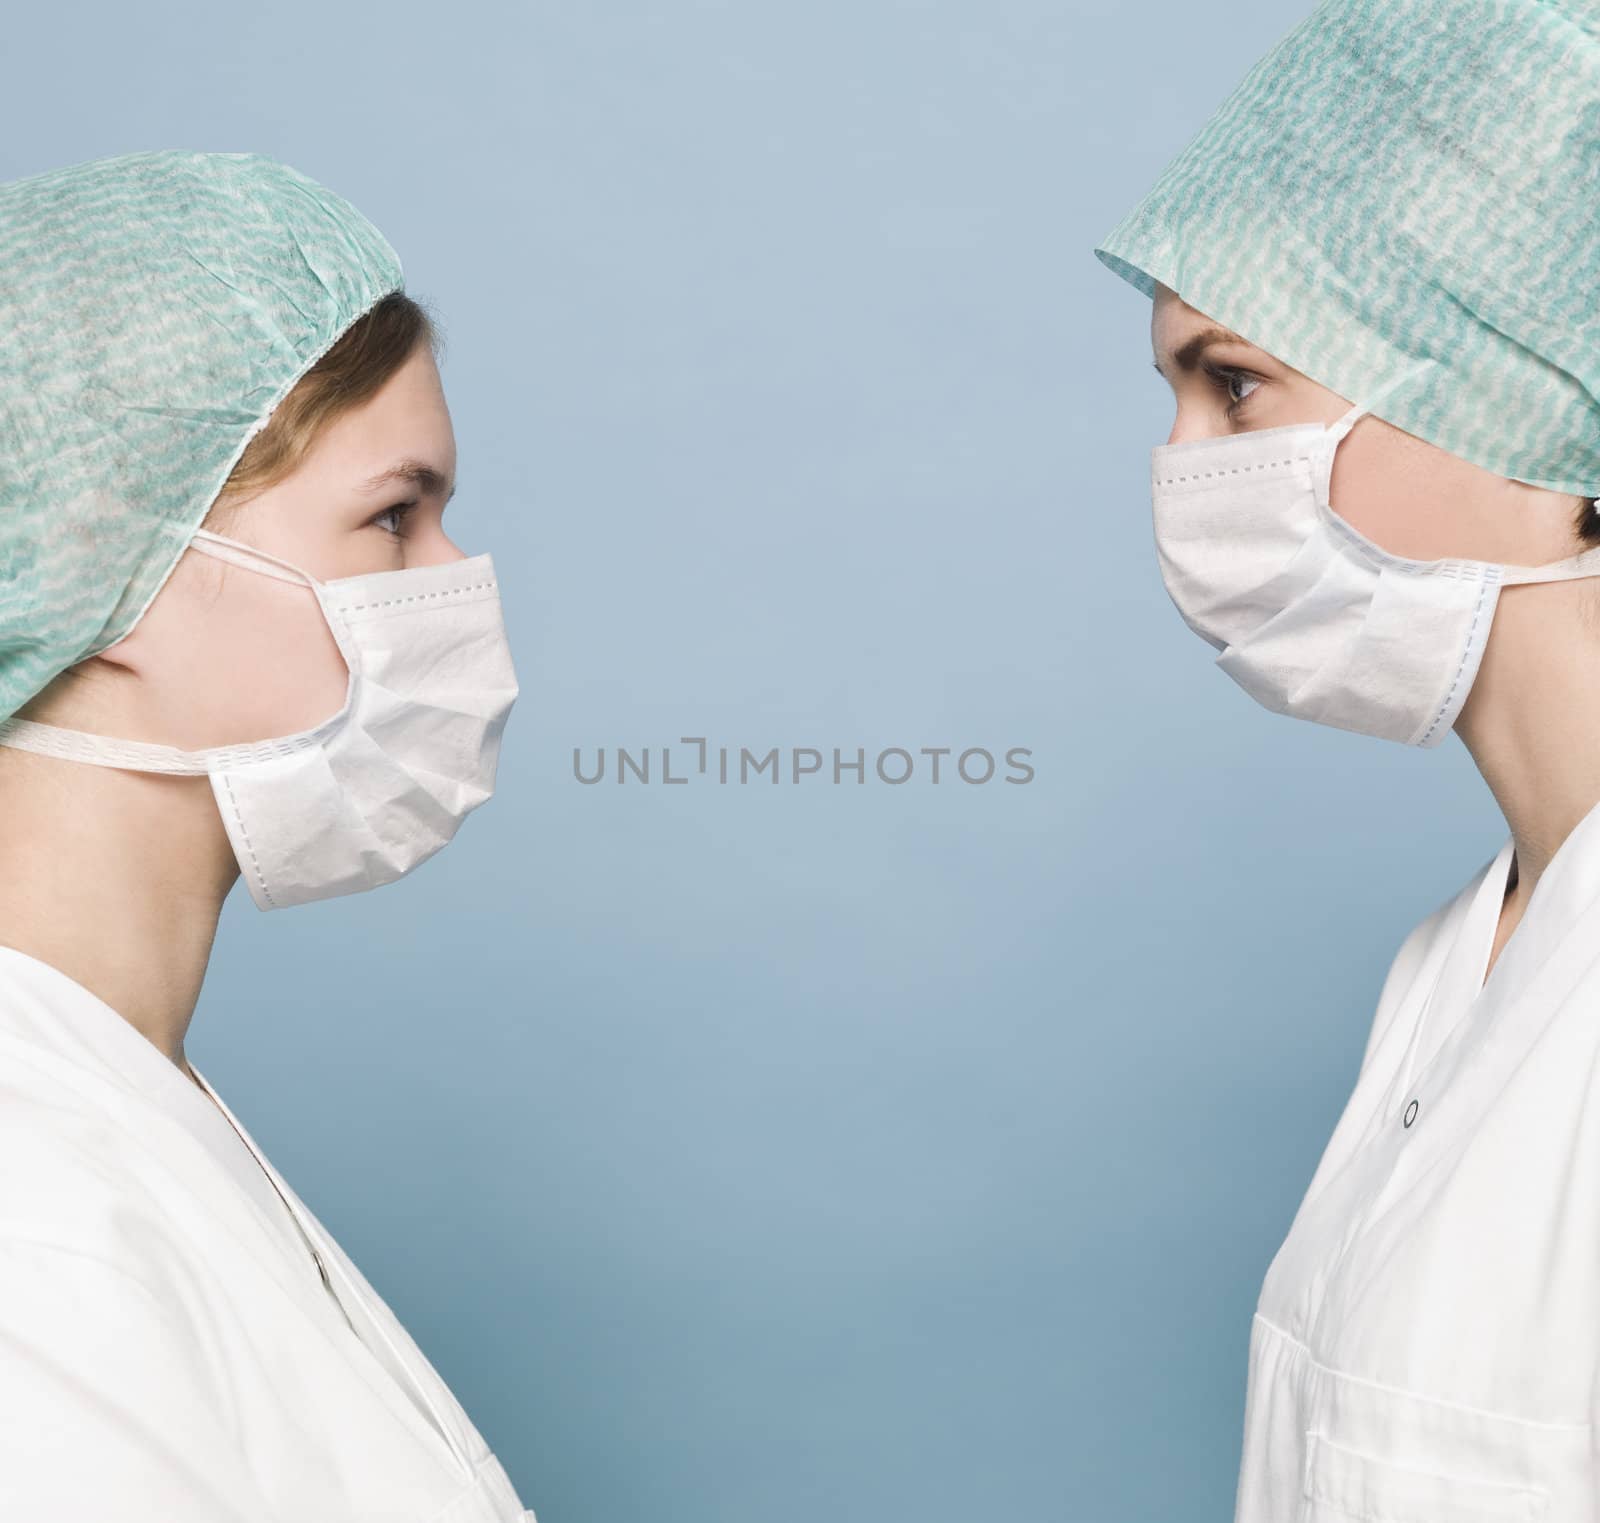 Two nurses with surgical masks